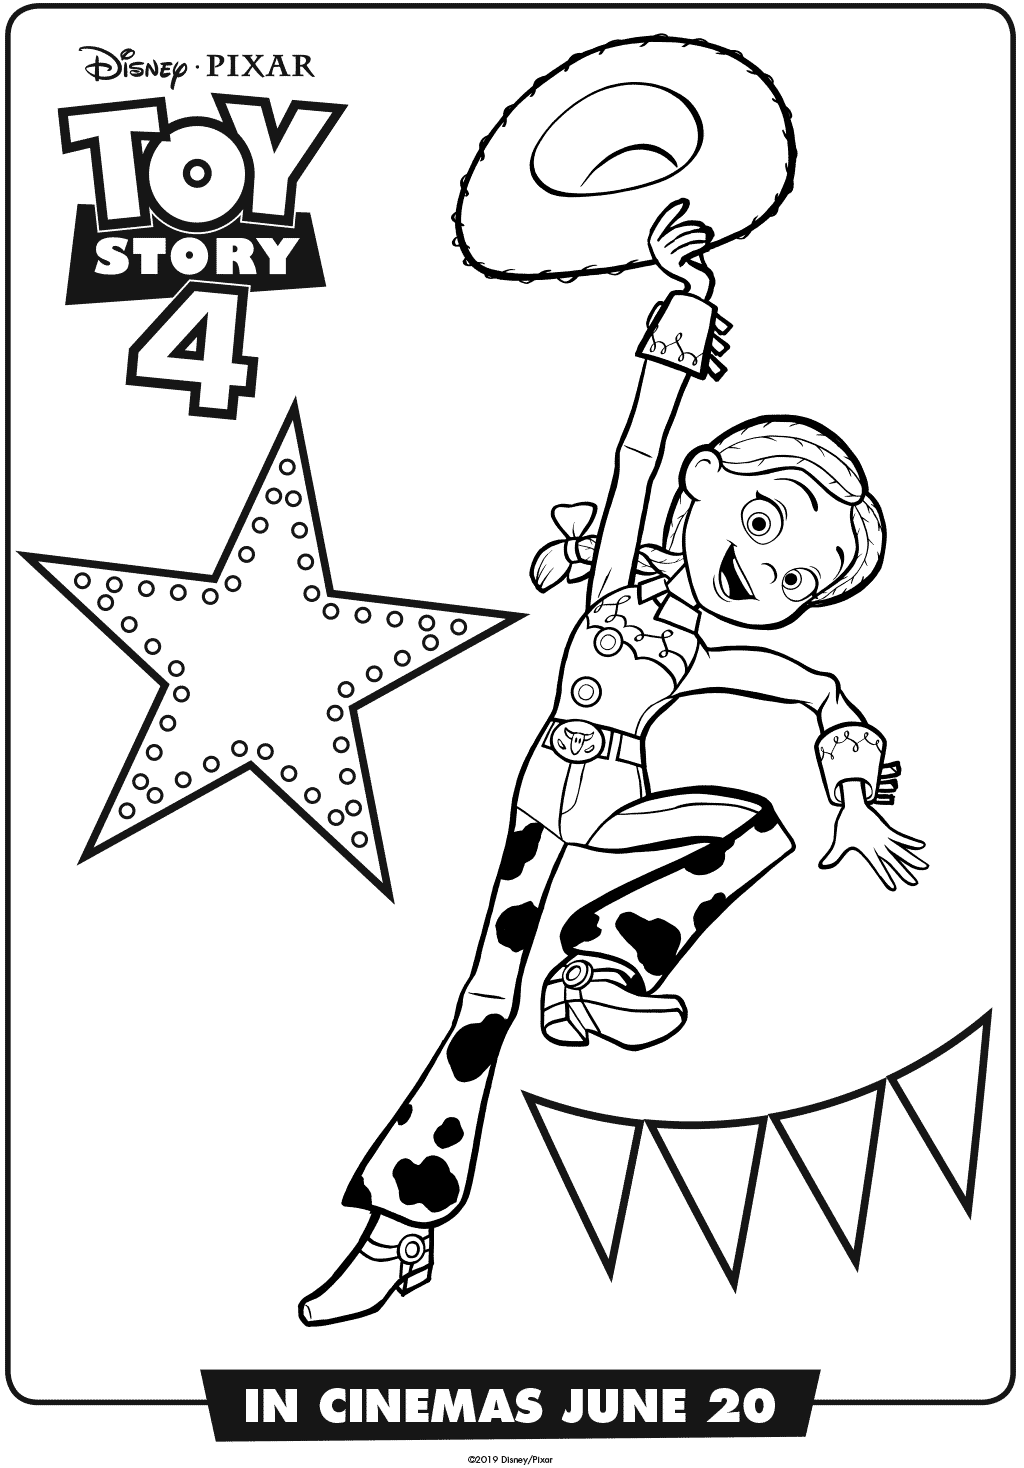 Jessie Toy Story 4 Coloring Page